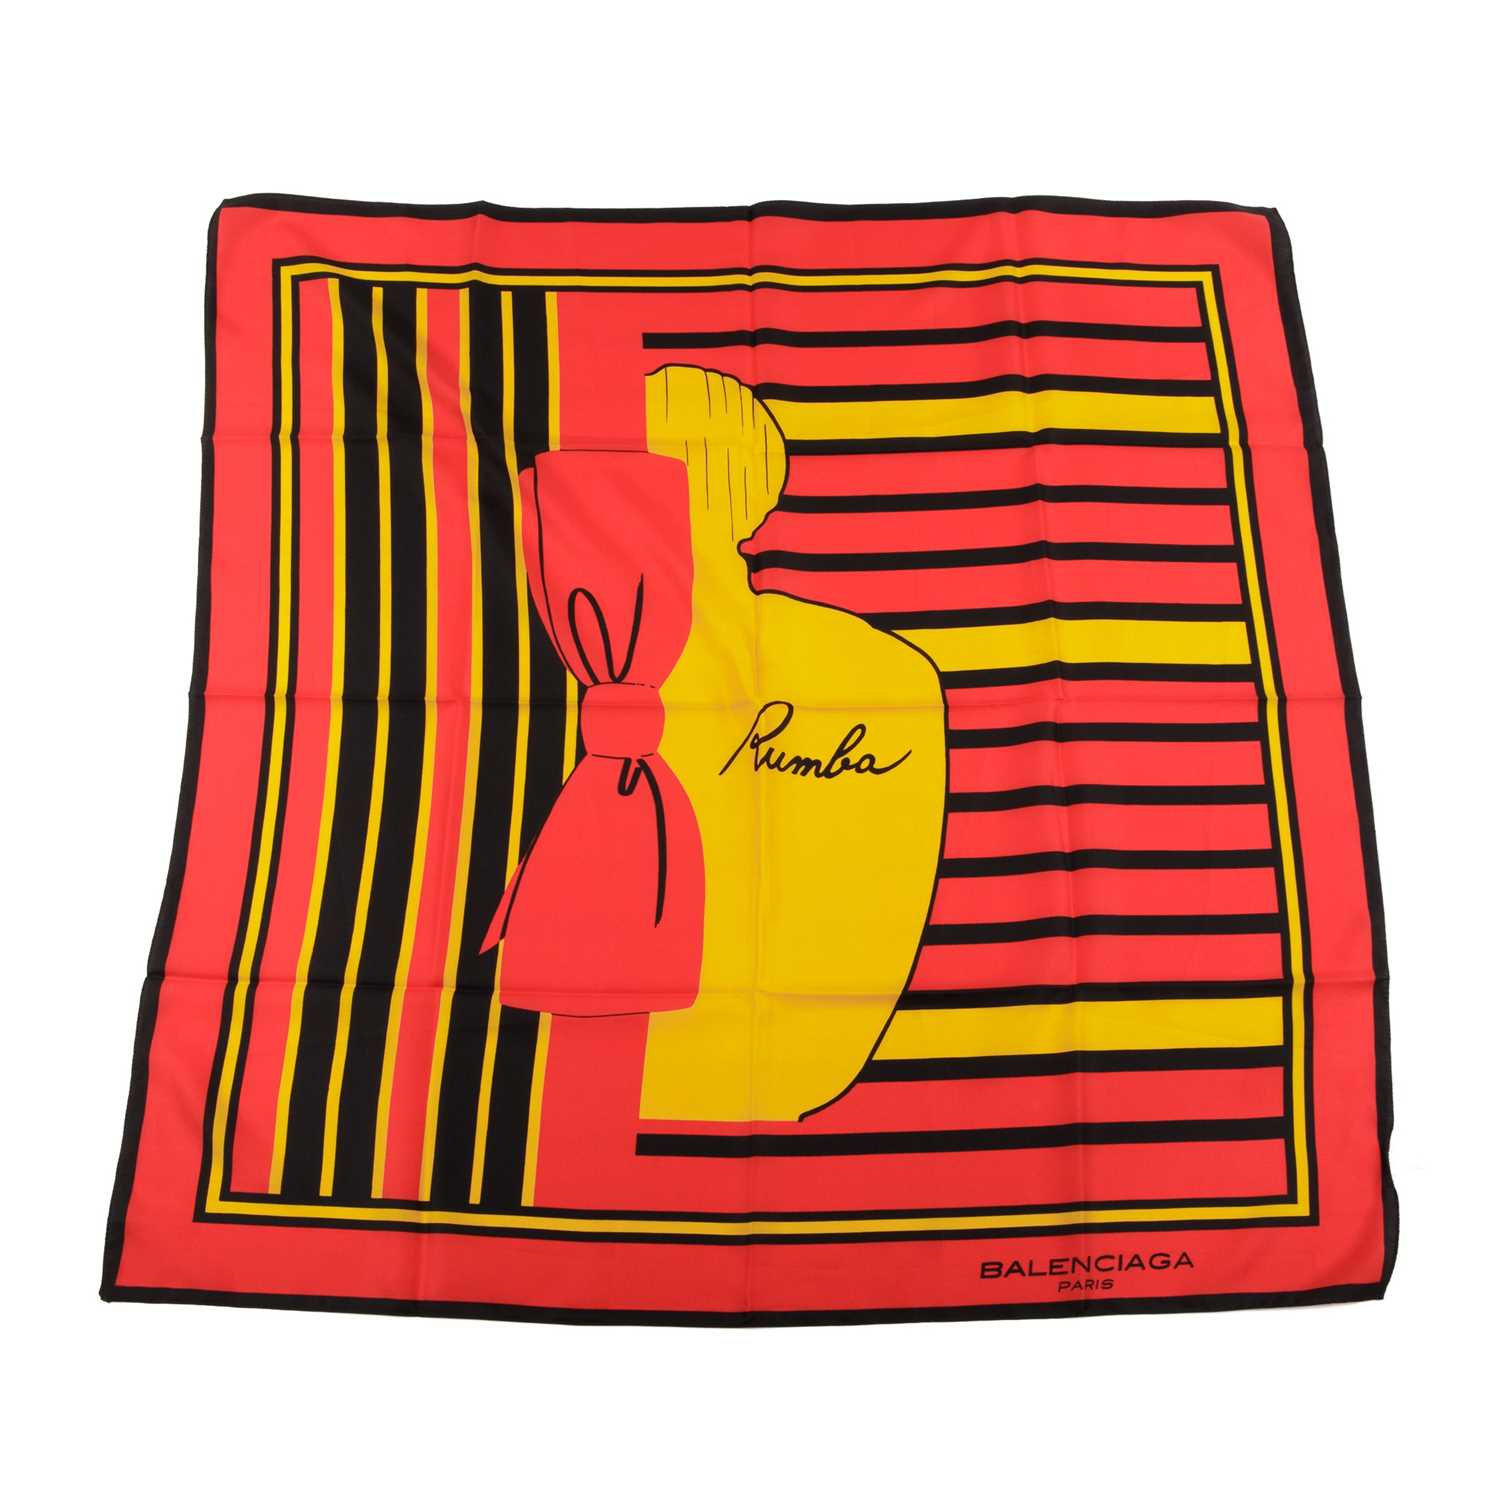 Balenciaga x Rumba, a vintage polyester scarf, designed for the perfume collaboration, featuring a - Image 2 of 3